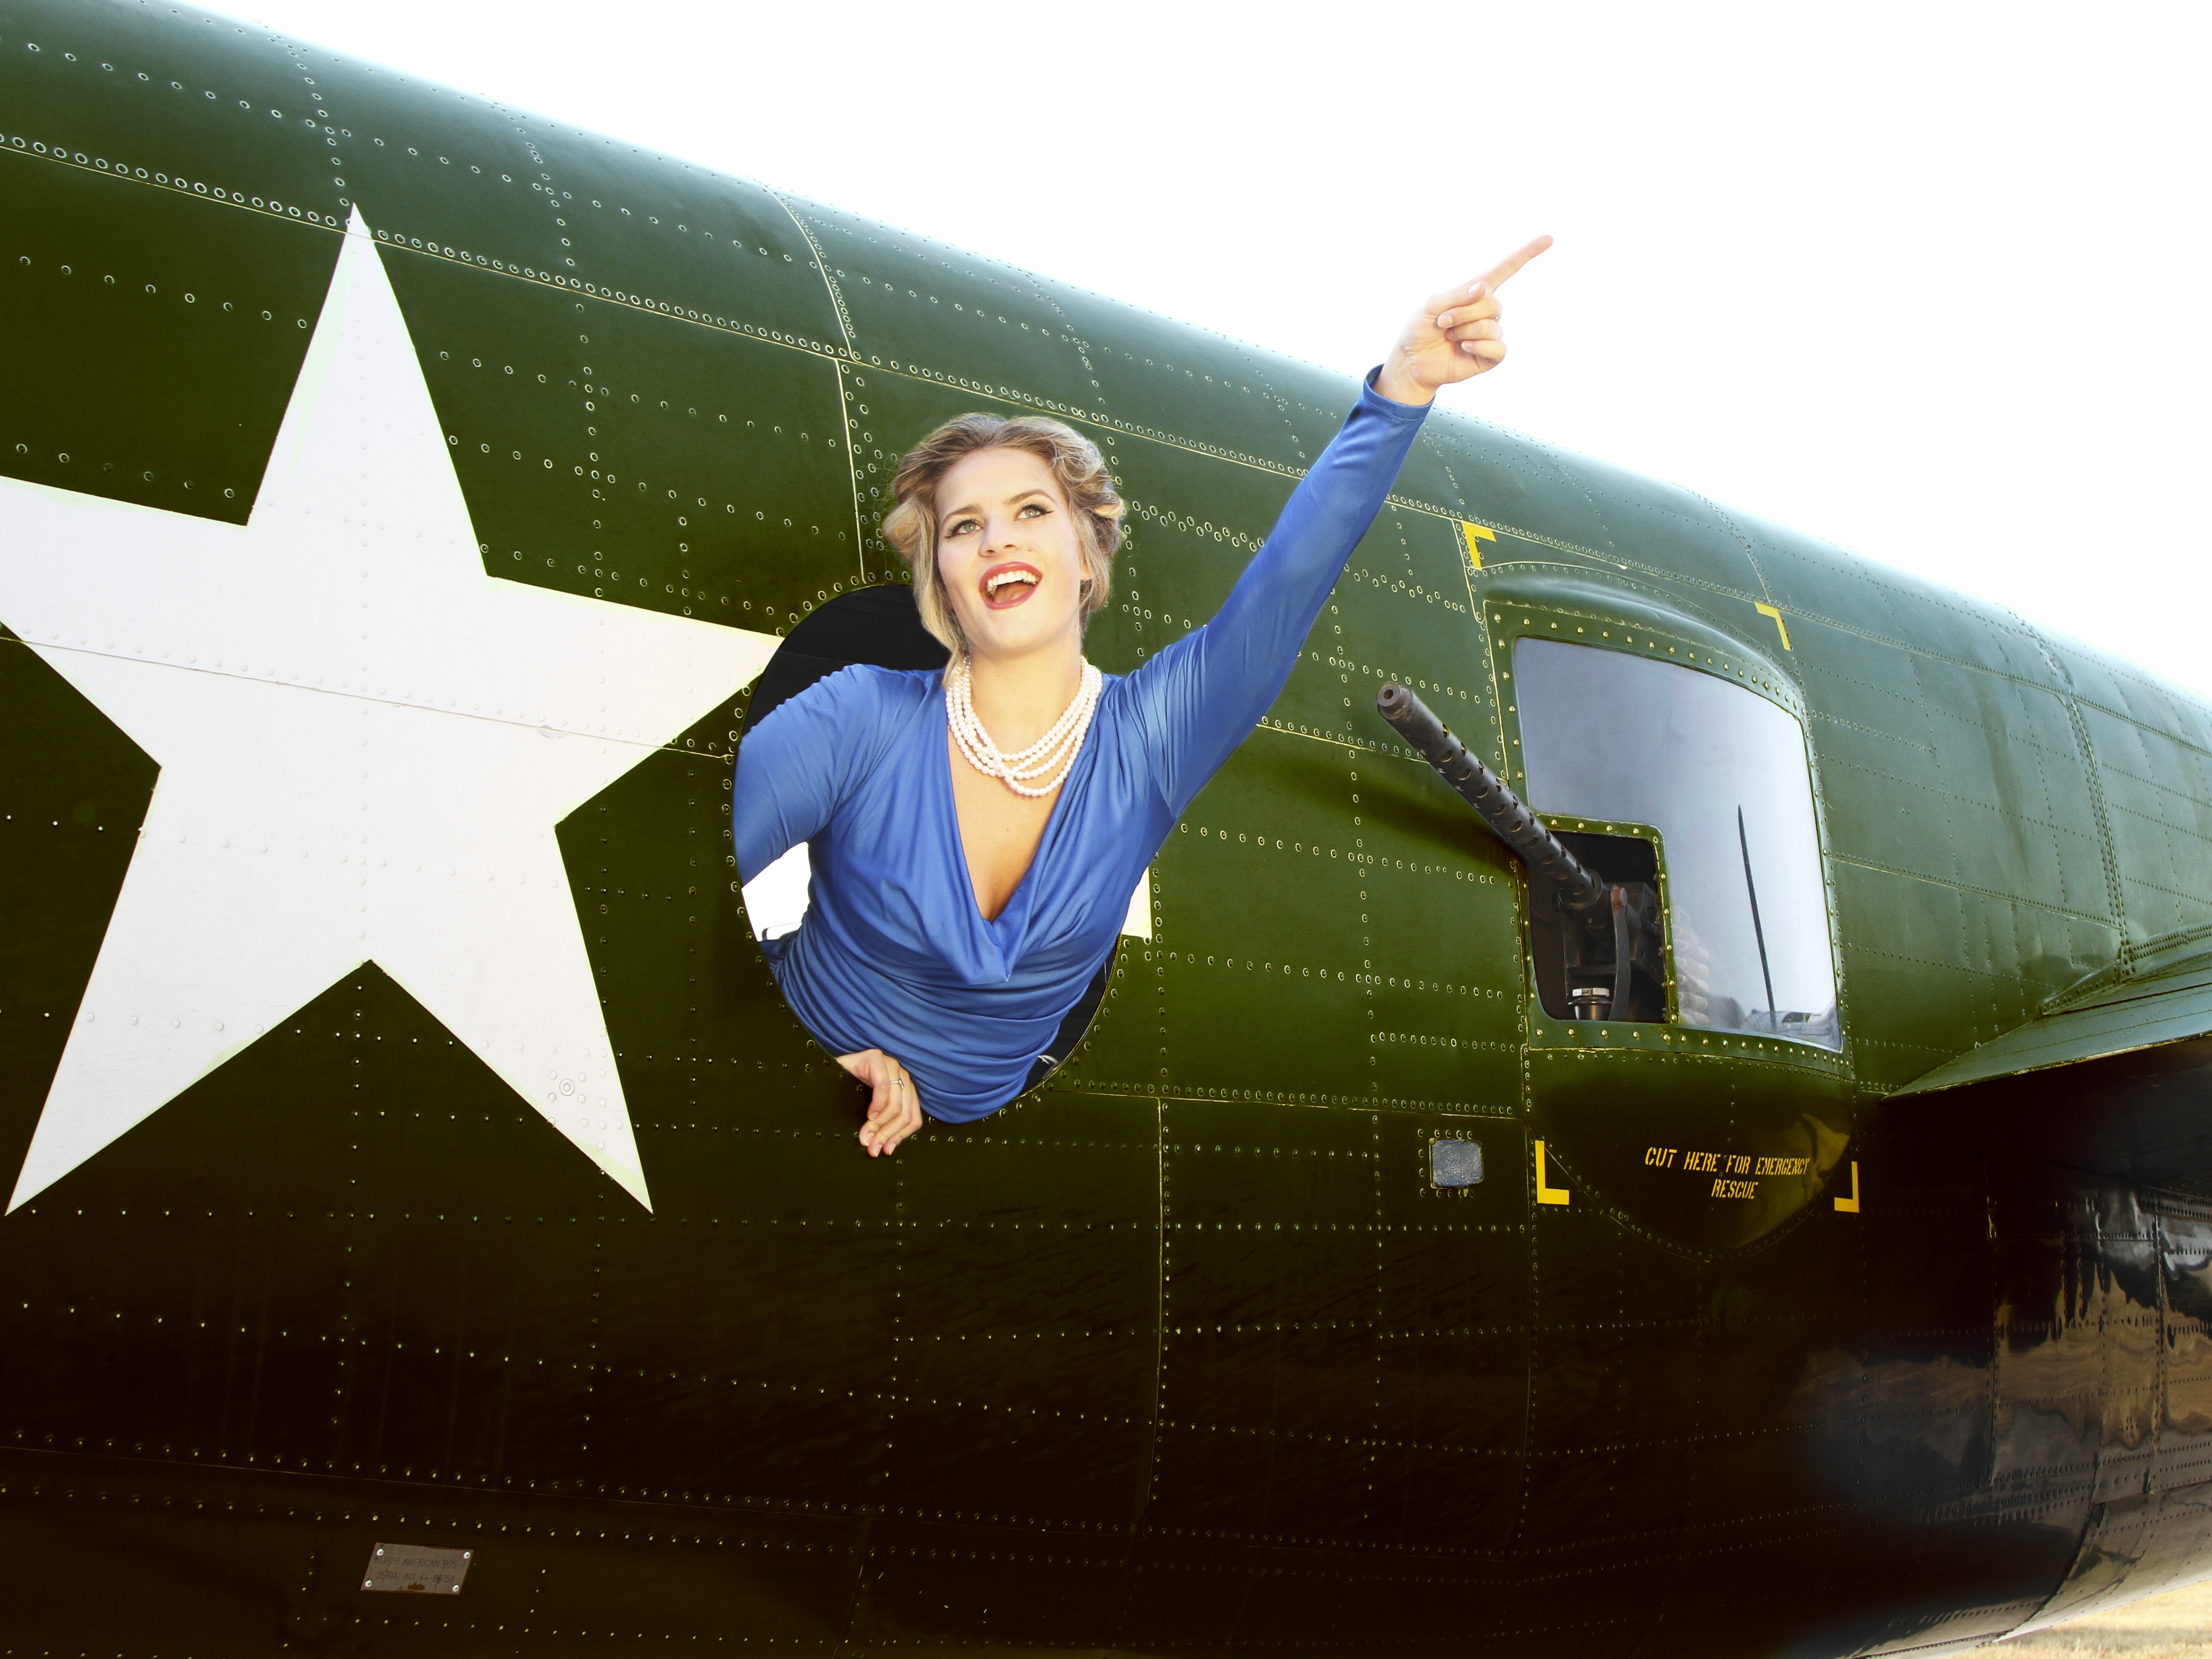 People 4608x3456 aircraft blonde pearl necklace open mouth vehicle arms up women model women with planes